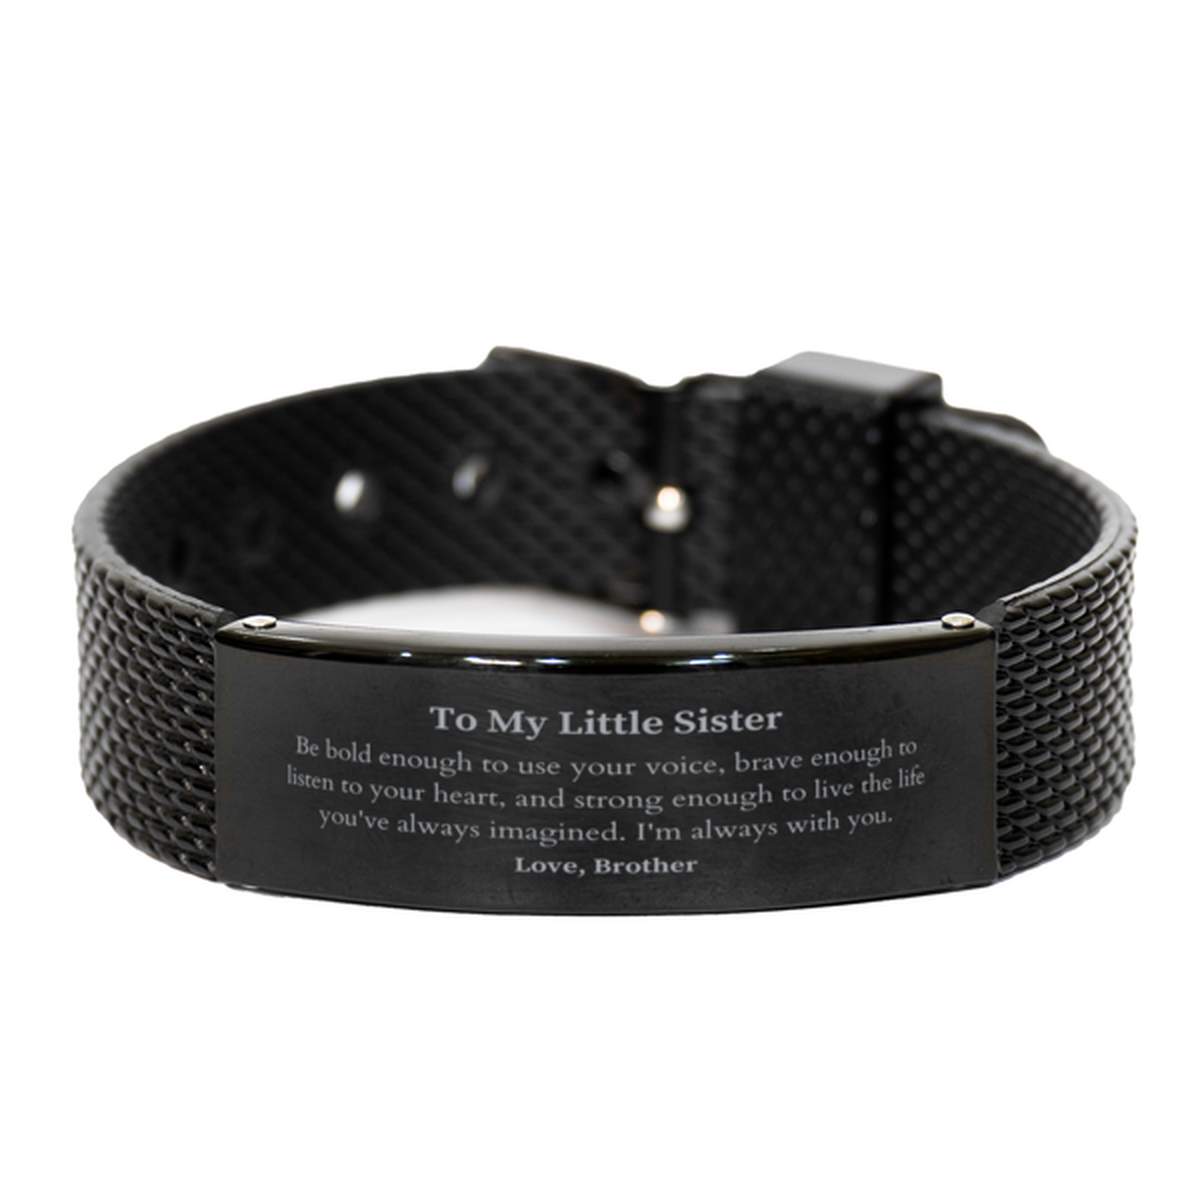 Keepsake Little Sister Black Shark Mesh Bracelet Gift Idea Graduation Christmas Birthday Little Sister from Brother, Little Sister Be bold enough to use your voice, brave enough to listen to your heart. Love, Brother